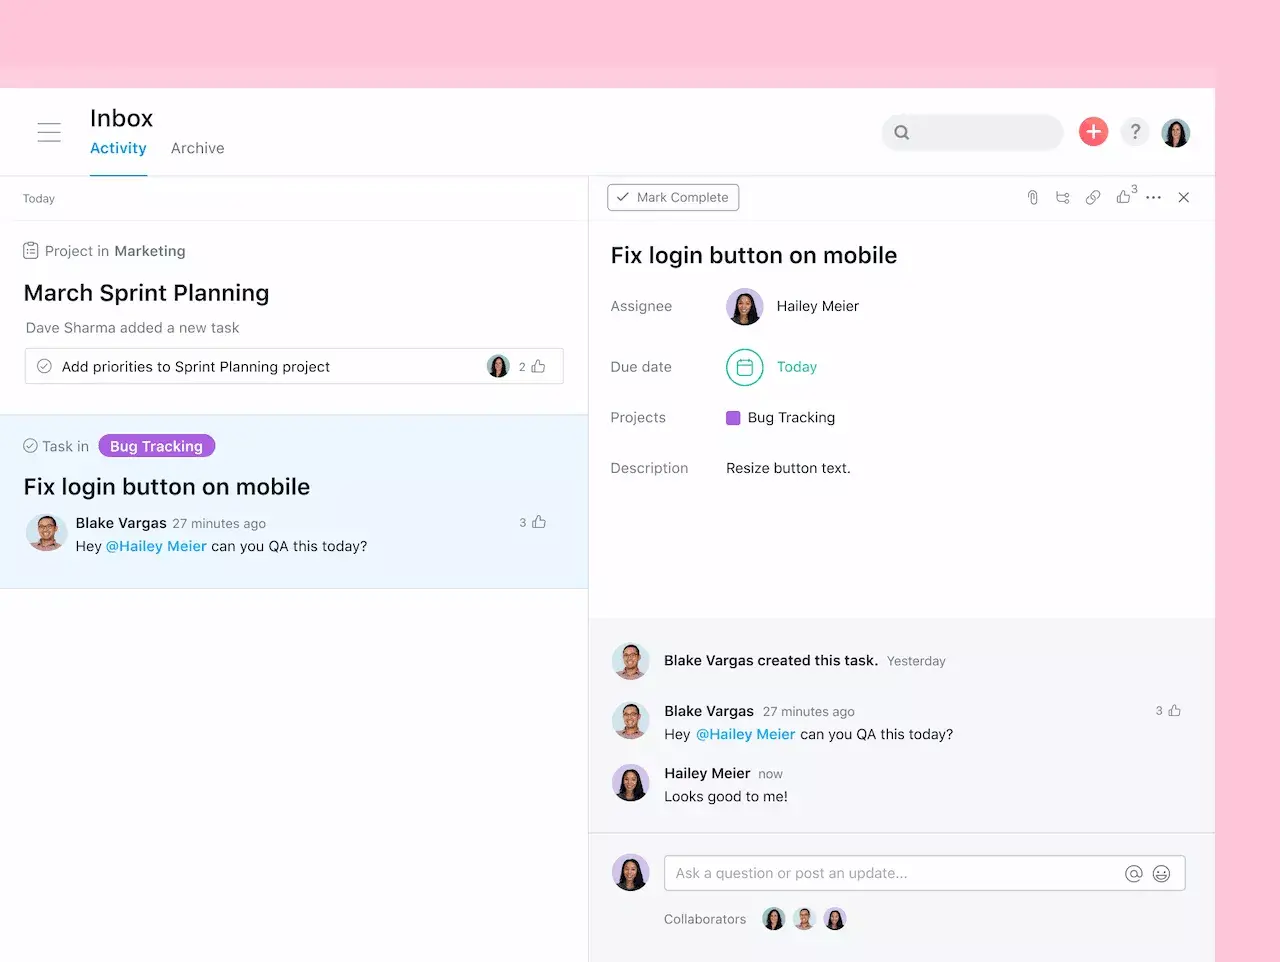 [Teams] Managers - Connect to the work that matters 